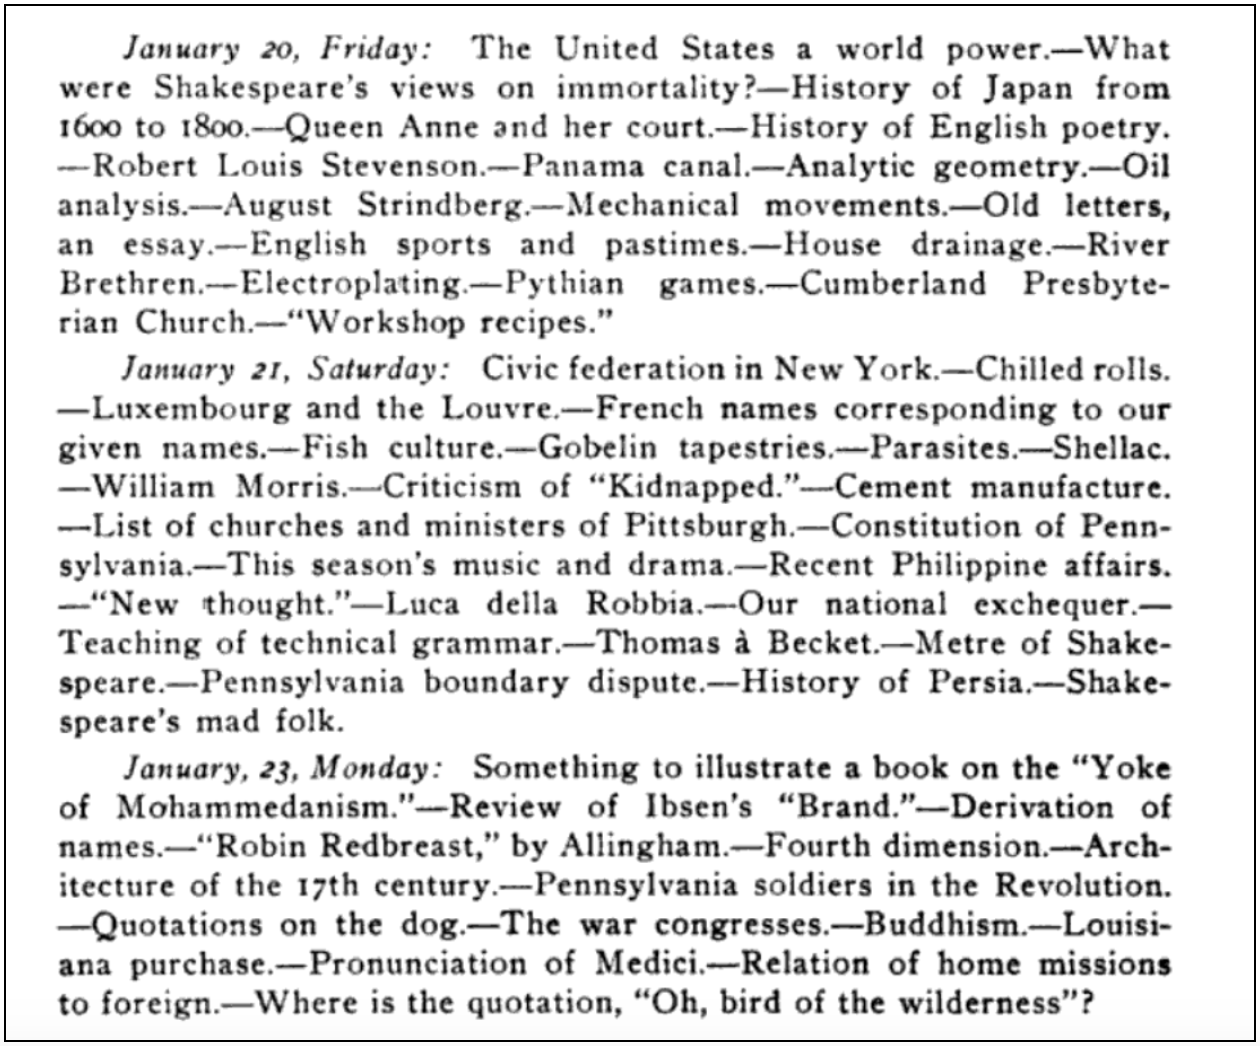 Excerpt from the Carnegie Library of Pittsburgh report:

January 20, Friday: The United States a world of power.—What were Shakespeare's views on immortality?—History of Japan from 1600 to 1800.—Queen Anne and her court.—History of English poetry.—Robert Louis Stevenson.—Panama canal.—Analytic geometry.—Oil analysis.—August Strindberg.—Mechanical movements.—Old letters, an essay.—English sports and pastimes.—house drainage.—River Brethren.—Electroplating.—Pythian games.—Cumberland Presbyterian Church.—"Workshop recipes."
January 21, Saturday: Civic federation in New York.—Chilled rolls.—Luxembourg and the Louvre.—French names corresponding to our given names.—Fish culture.—Gobelin tapestries.—Parasites.—Shellac.—William Morris.—Criticism of "Kidnapped."—Cement manufacture.—List of churches and ministers of Pittsburgh.—Constitution of Pennsylvania.—This season's music and drama.—Recent Philippine affairs.—"New thought."—Luca della Robbia.—Our national exchequer.—Teaching of technical grammar.—Thomas a Becket.—Metre of Shakespeare.—Pennsylvania boundary dispute.—History of Persia.—Shakespeare's mad folk.
January 23, Monday: Something to illustrate a book on the "Yoke of Mohammedanism."—Review of Ibsen's "Brand."—Derivation of names.—"Robin Redbreast," by Allingham.—Fourth dimension.—Architecture of the 17th century.—Pennsylvania soldiers in the Revolution.—Quotations on the dog. —The war congresses.—Buddhism.—Louisiana purchase.—Pronunciation of Medici.—Relation of home missions to foreign.—Where is the quotation, "Oh, bird of the wilderness"?